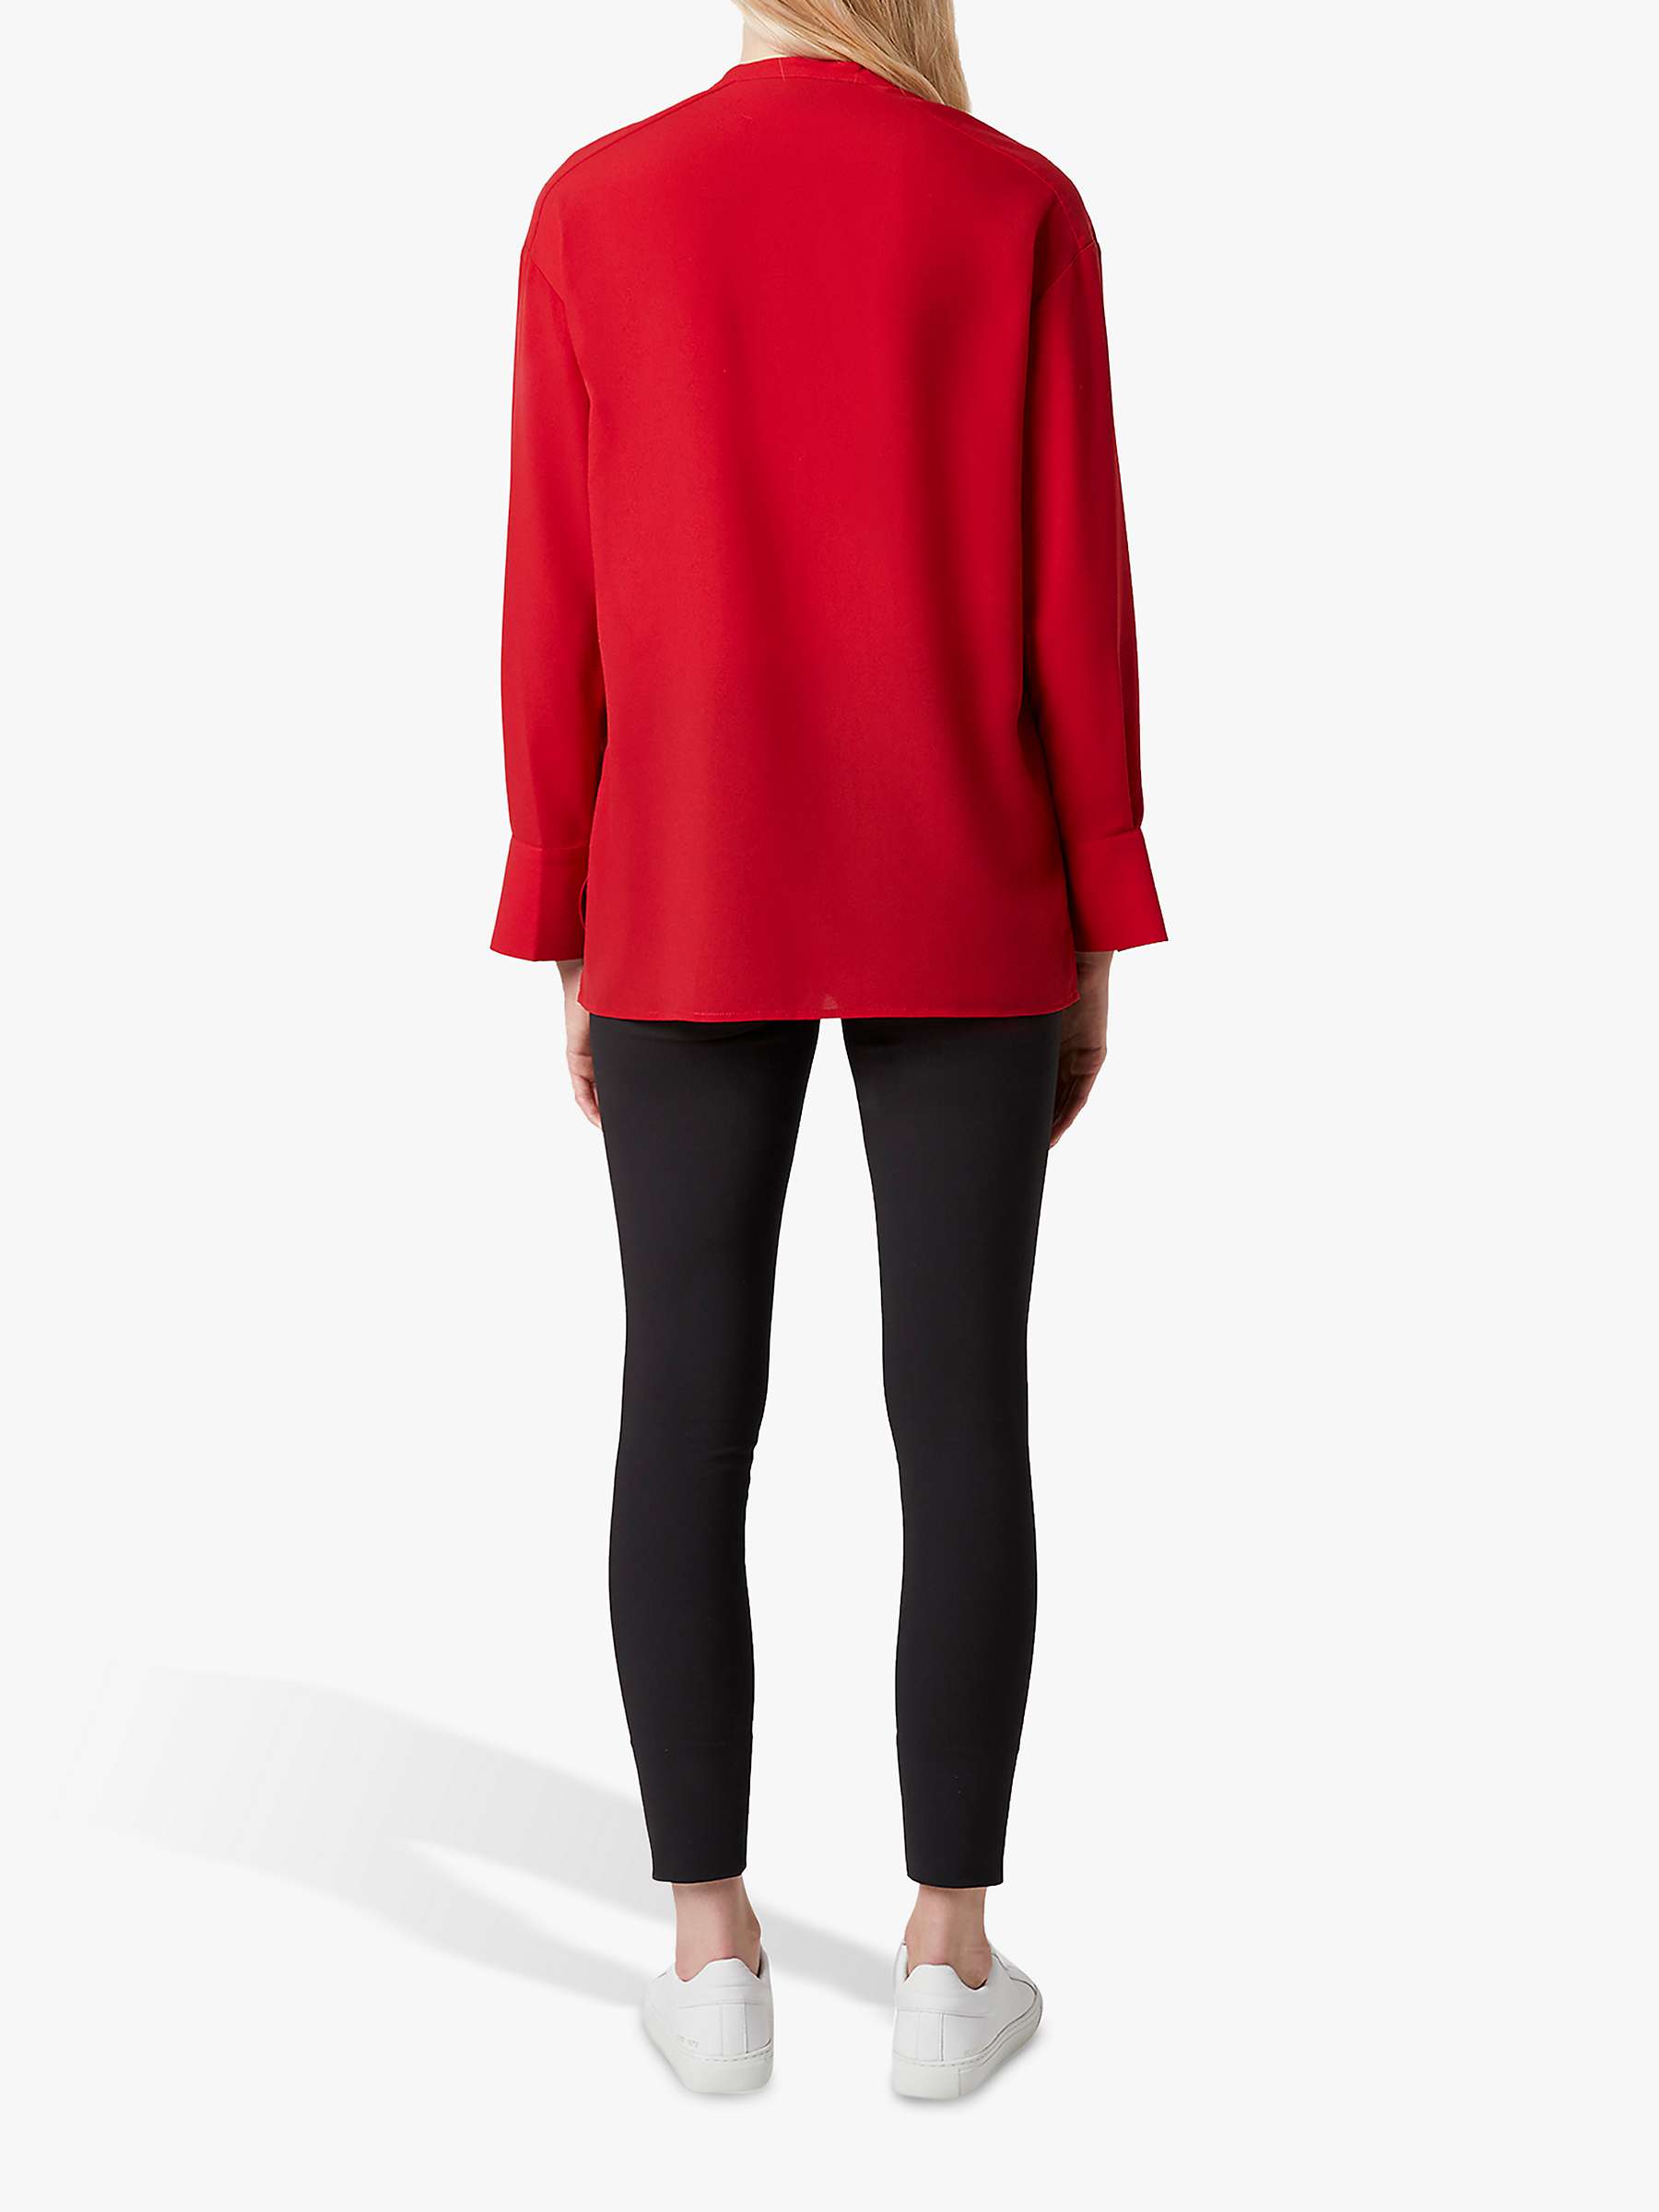 Buy French Connection Elna Light Blouse Online at johnlewis.com